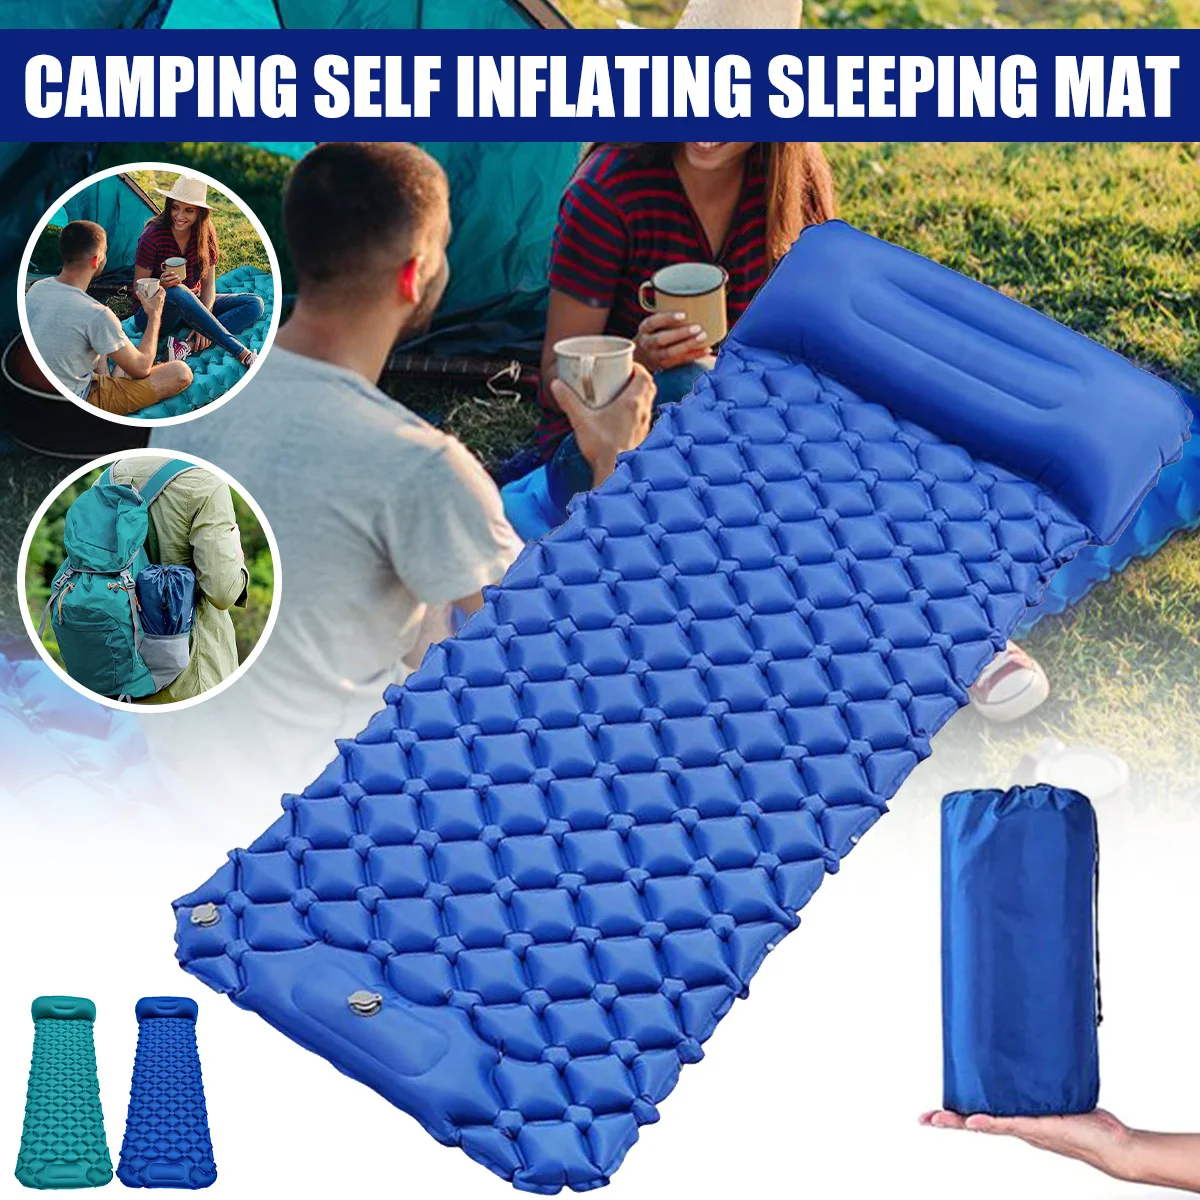 Outdoor Sleeping Pad Camping Inflatable Mattress with Pillows Folding Bed Mat Air Cushion for Camping Travel Hiking Trekking